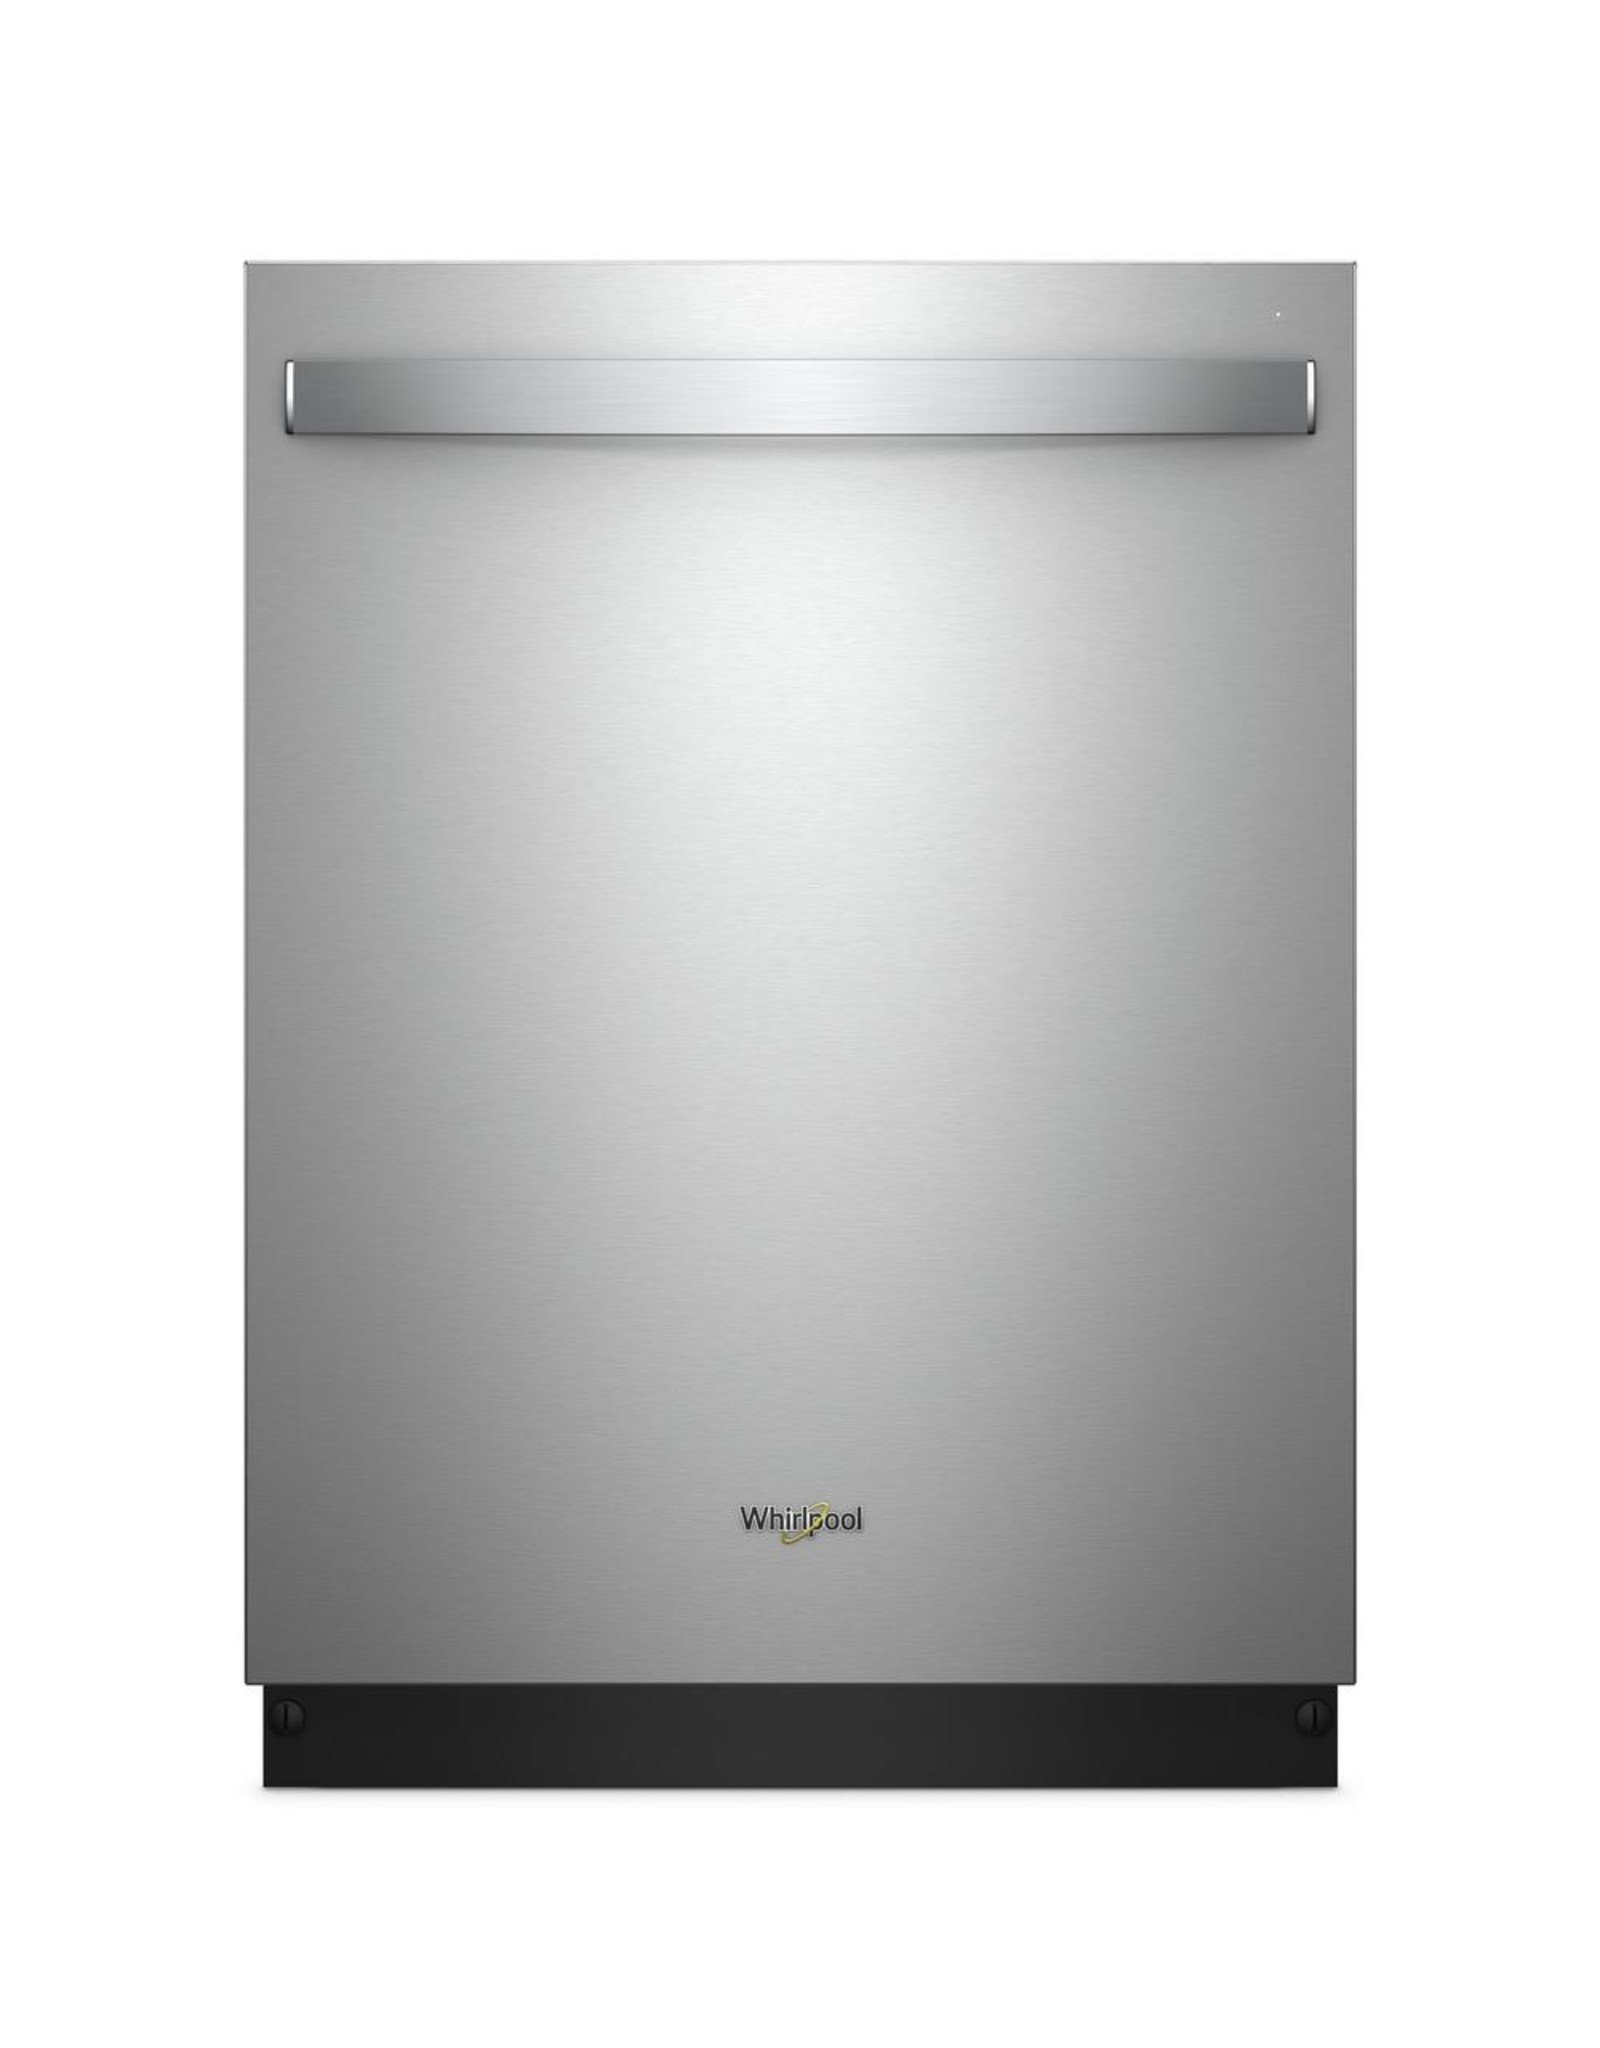 WHIRLPOOL WDT730PAHZ0  AS IS Control Built-In Tall Tub Dishwasher in Fingerprint Resistant Stainless Steel with Stainless Steel Tub, 47 dBA